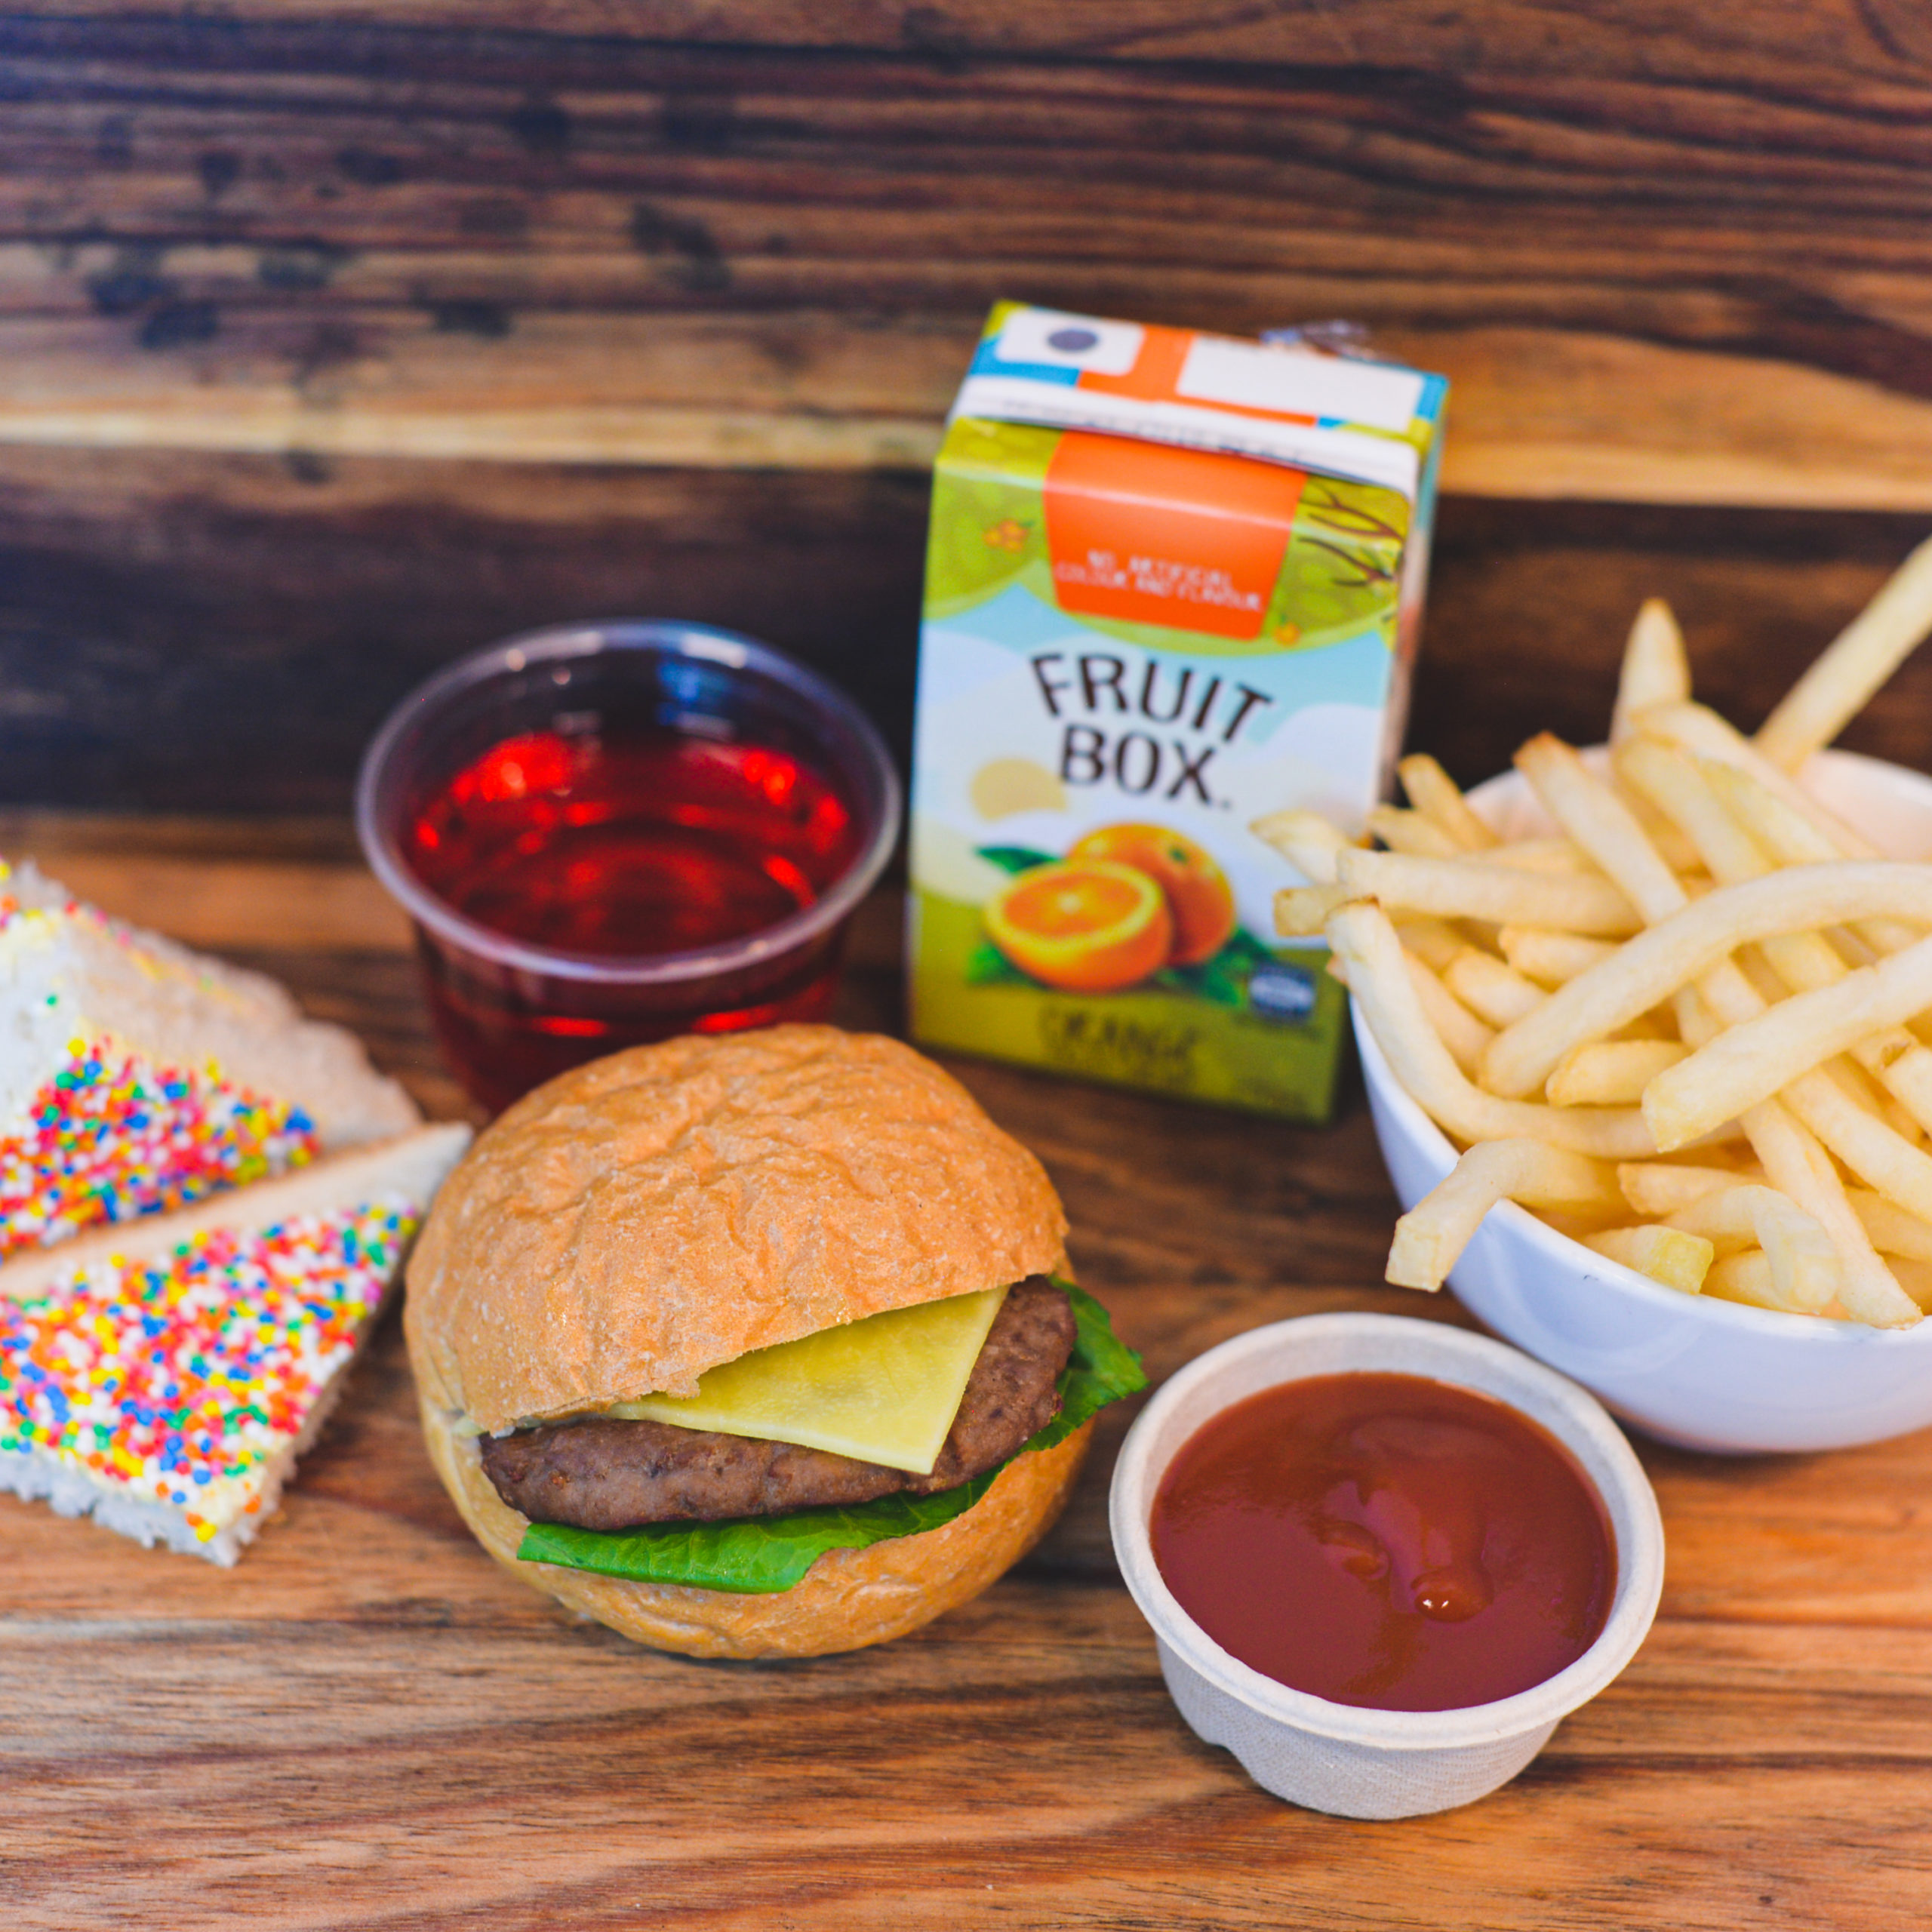 Beef Burger, small French fries, sauce, fairy bread, Jelly and juice box ($38.00)